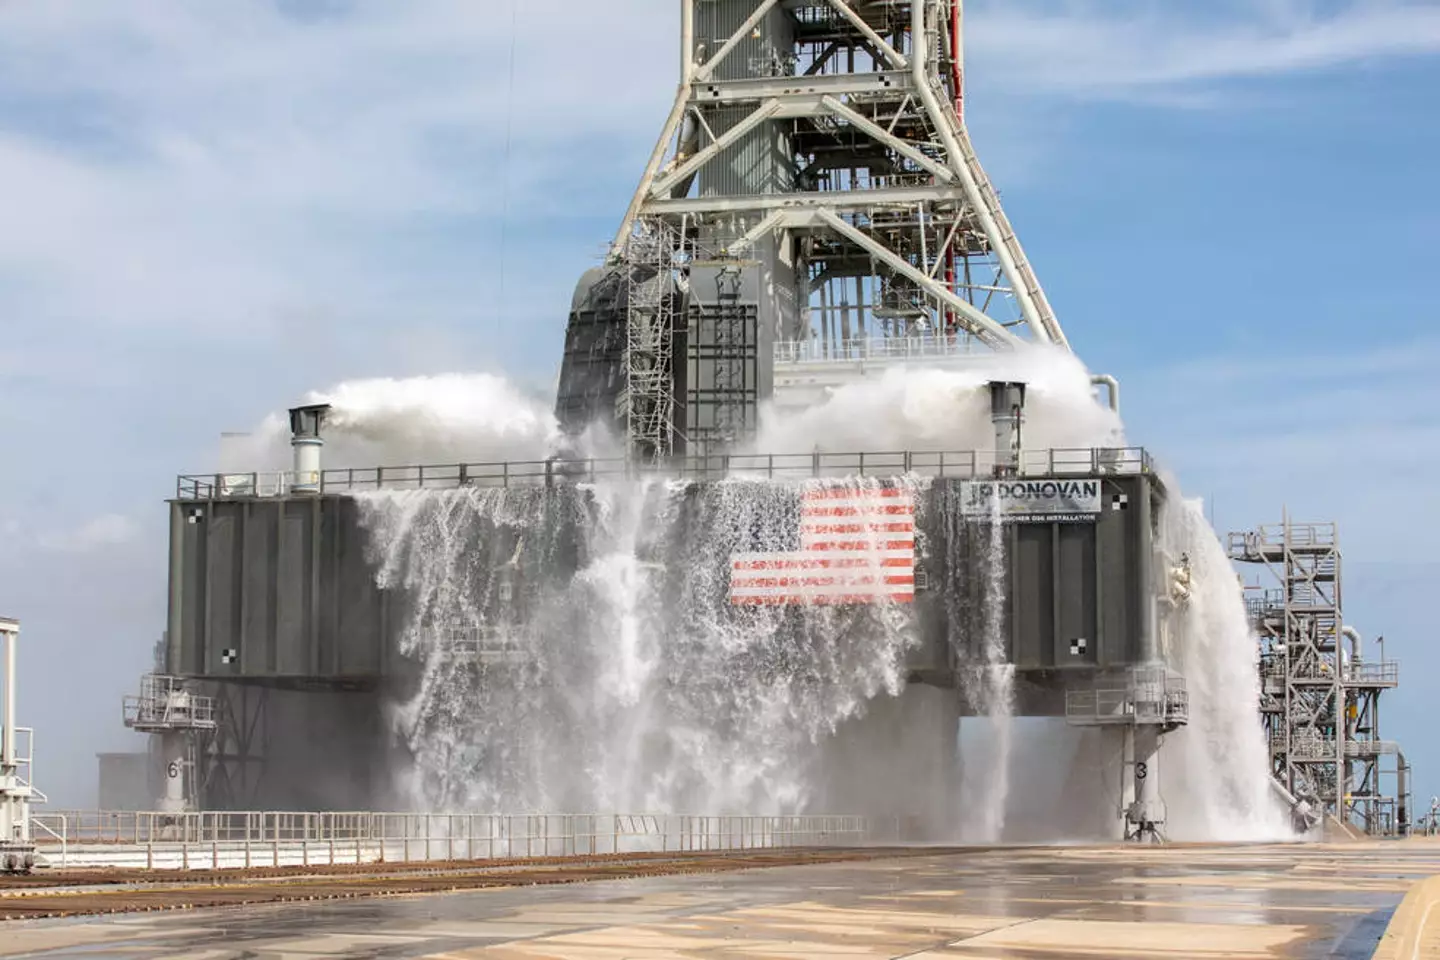 NASA's water sound suppression system at Kennedy Space Center.